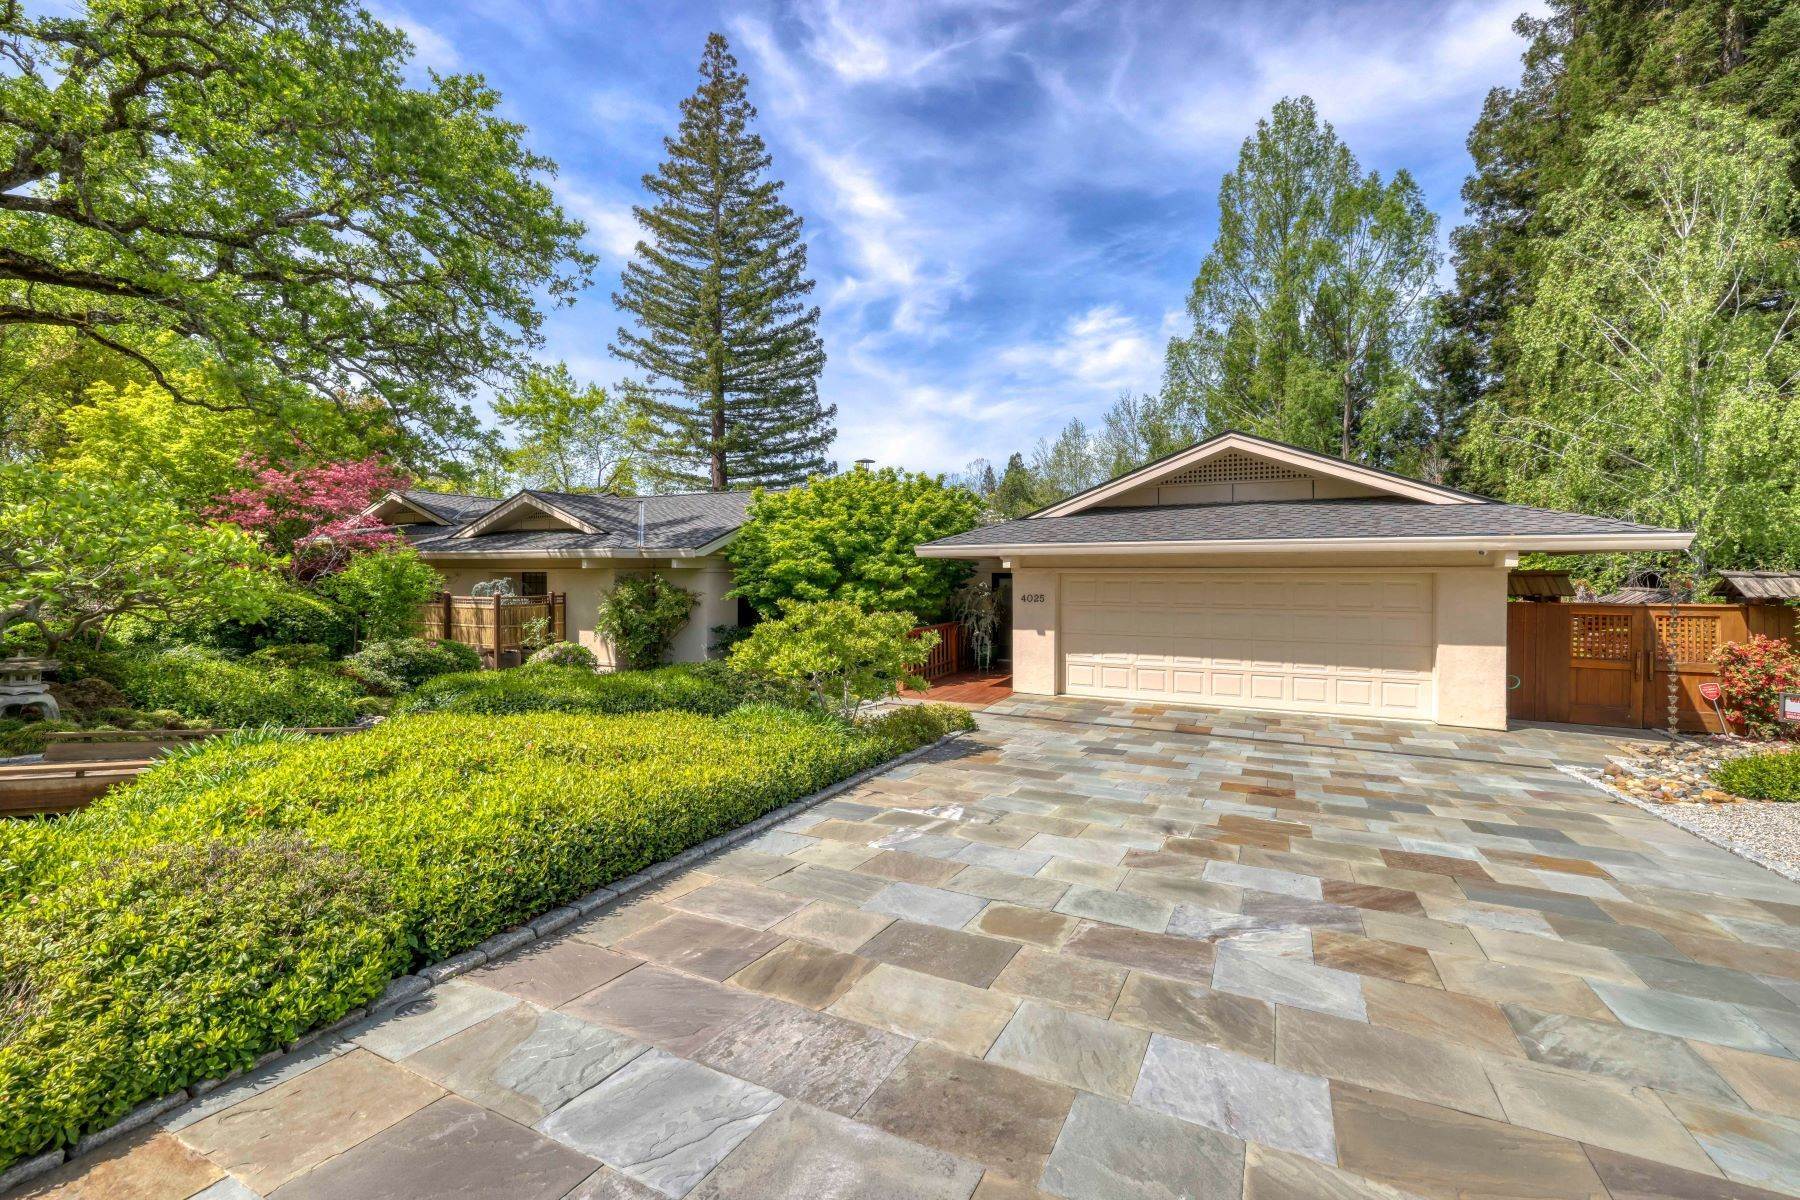 Single Family Homes for Active at 4025 Canonero Court, Fair Oaks, CA 95628 4025 Canonero Court Fair Oaks, California 95628 United States